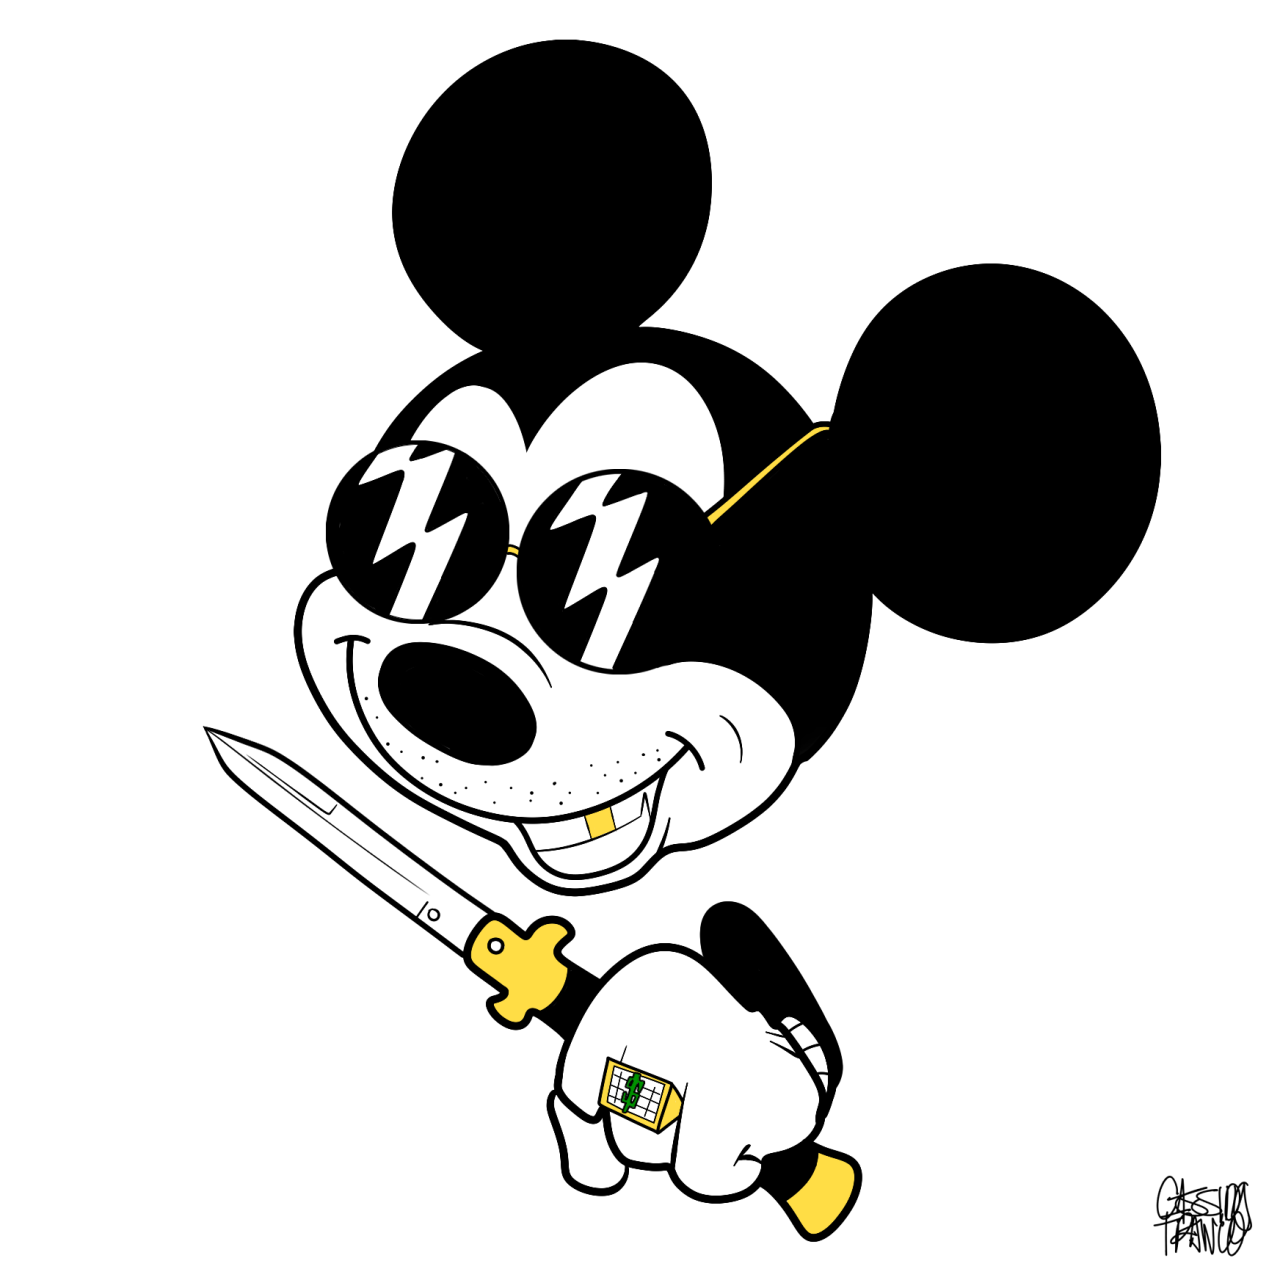 Gangster mickey mouse.